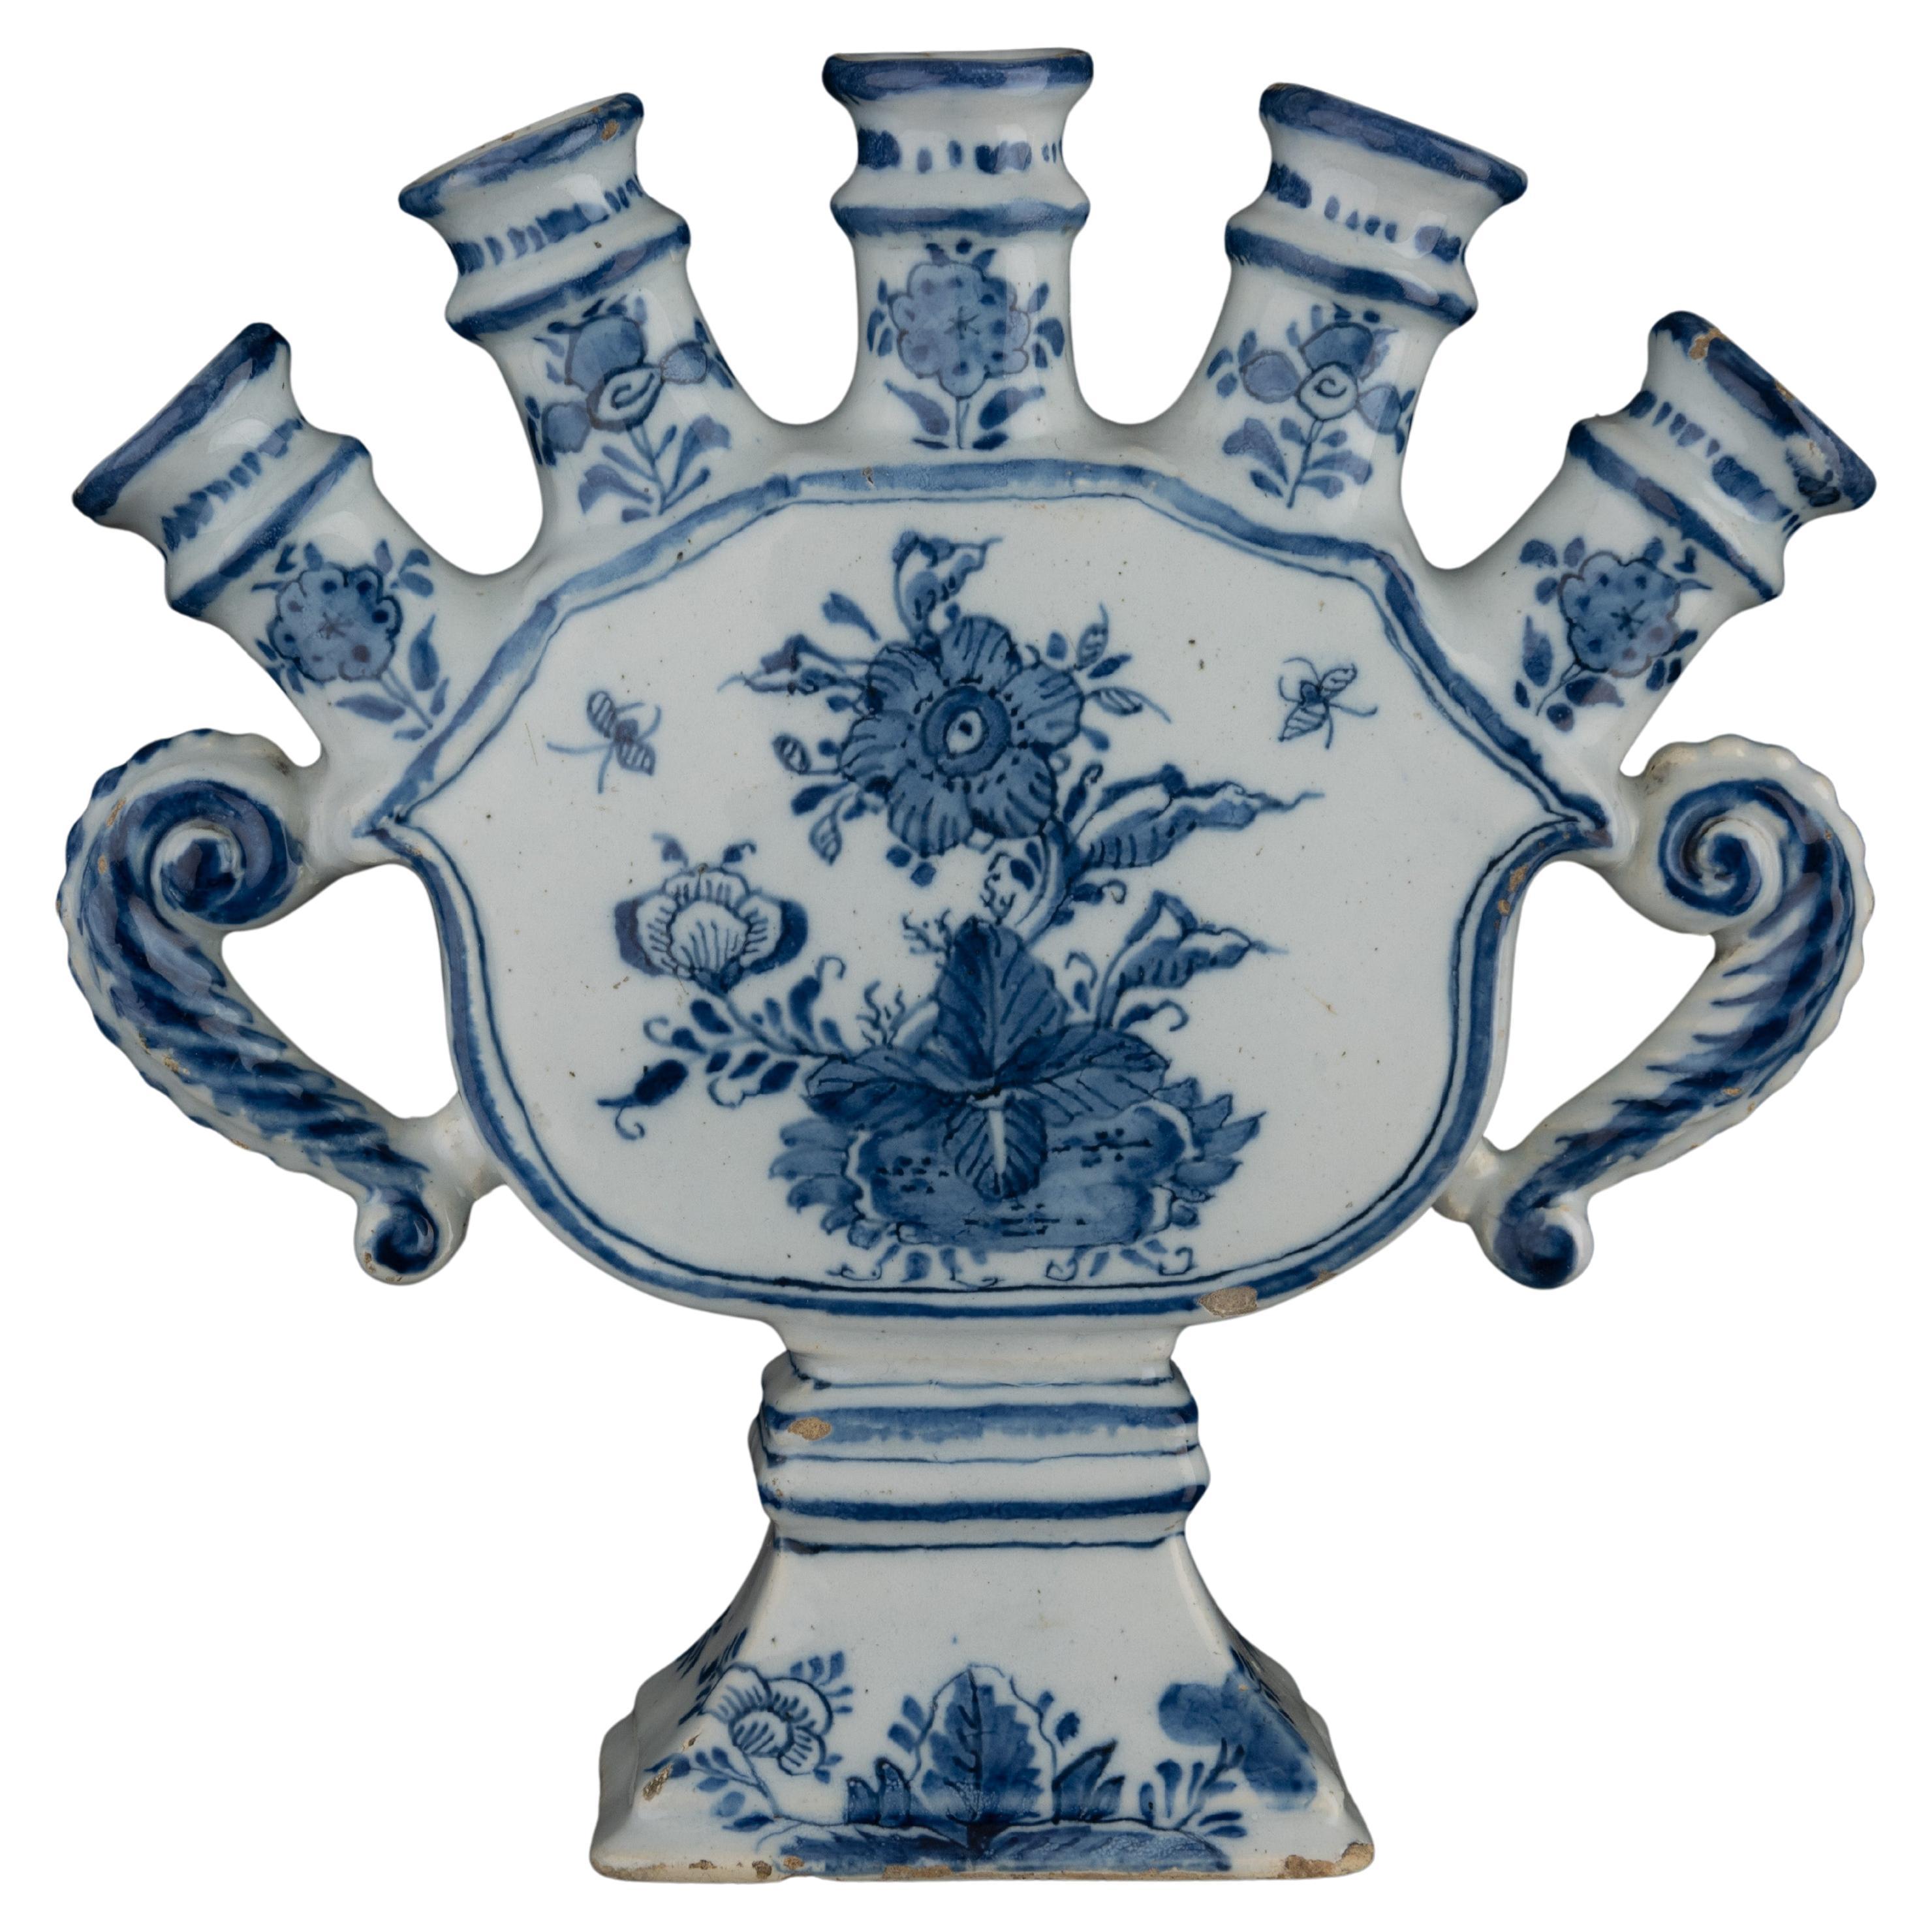 Delft Blue and White Flower Vase with Spouts 1720-1730 Tulip Vase For Sale